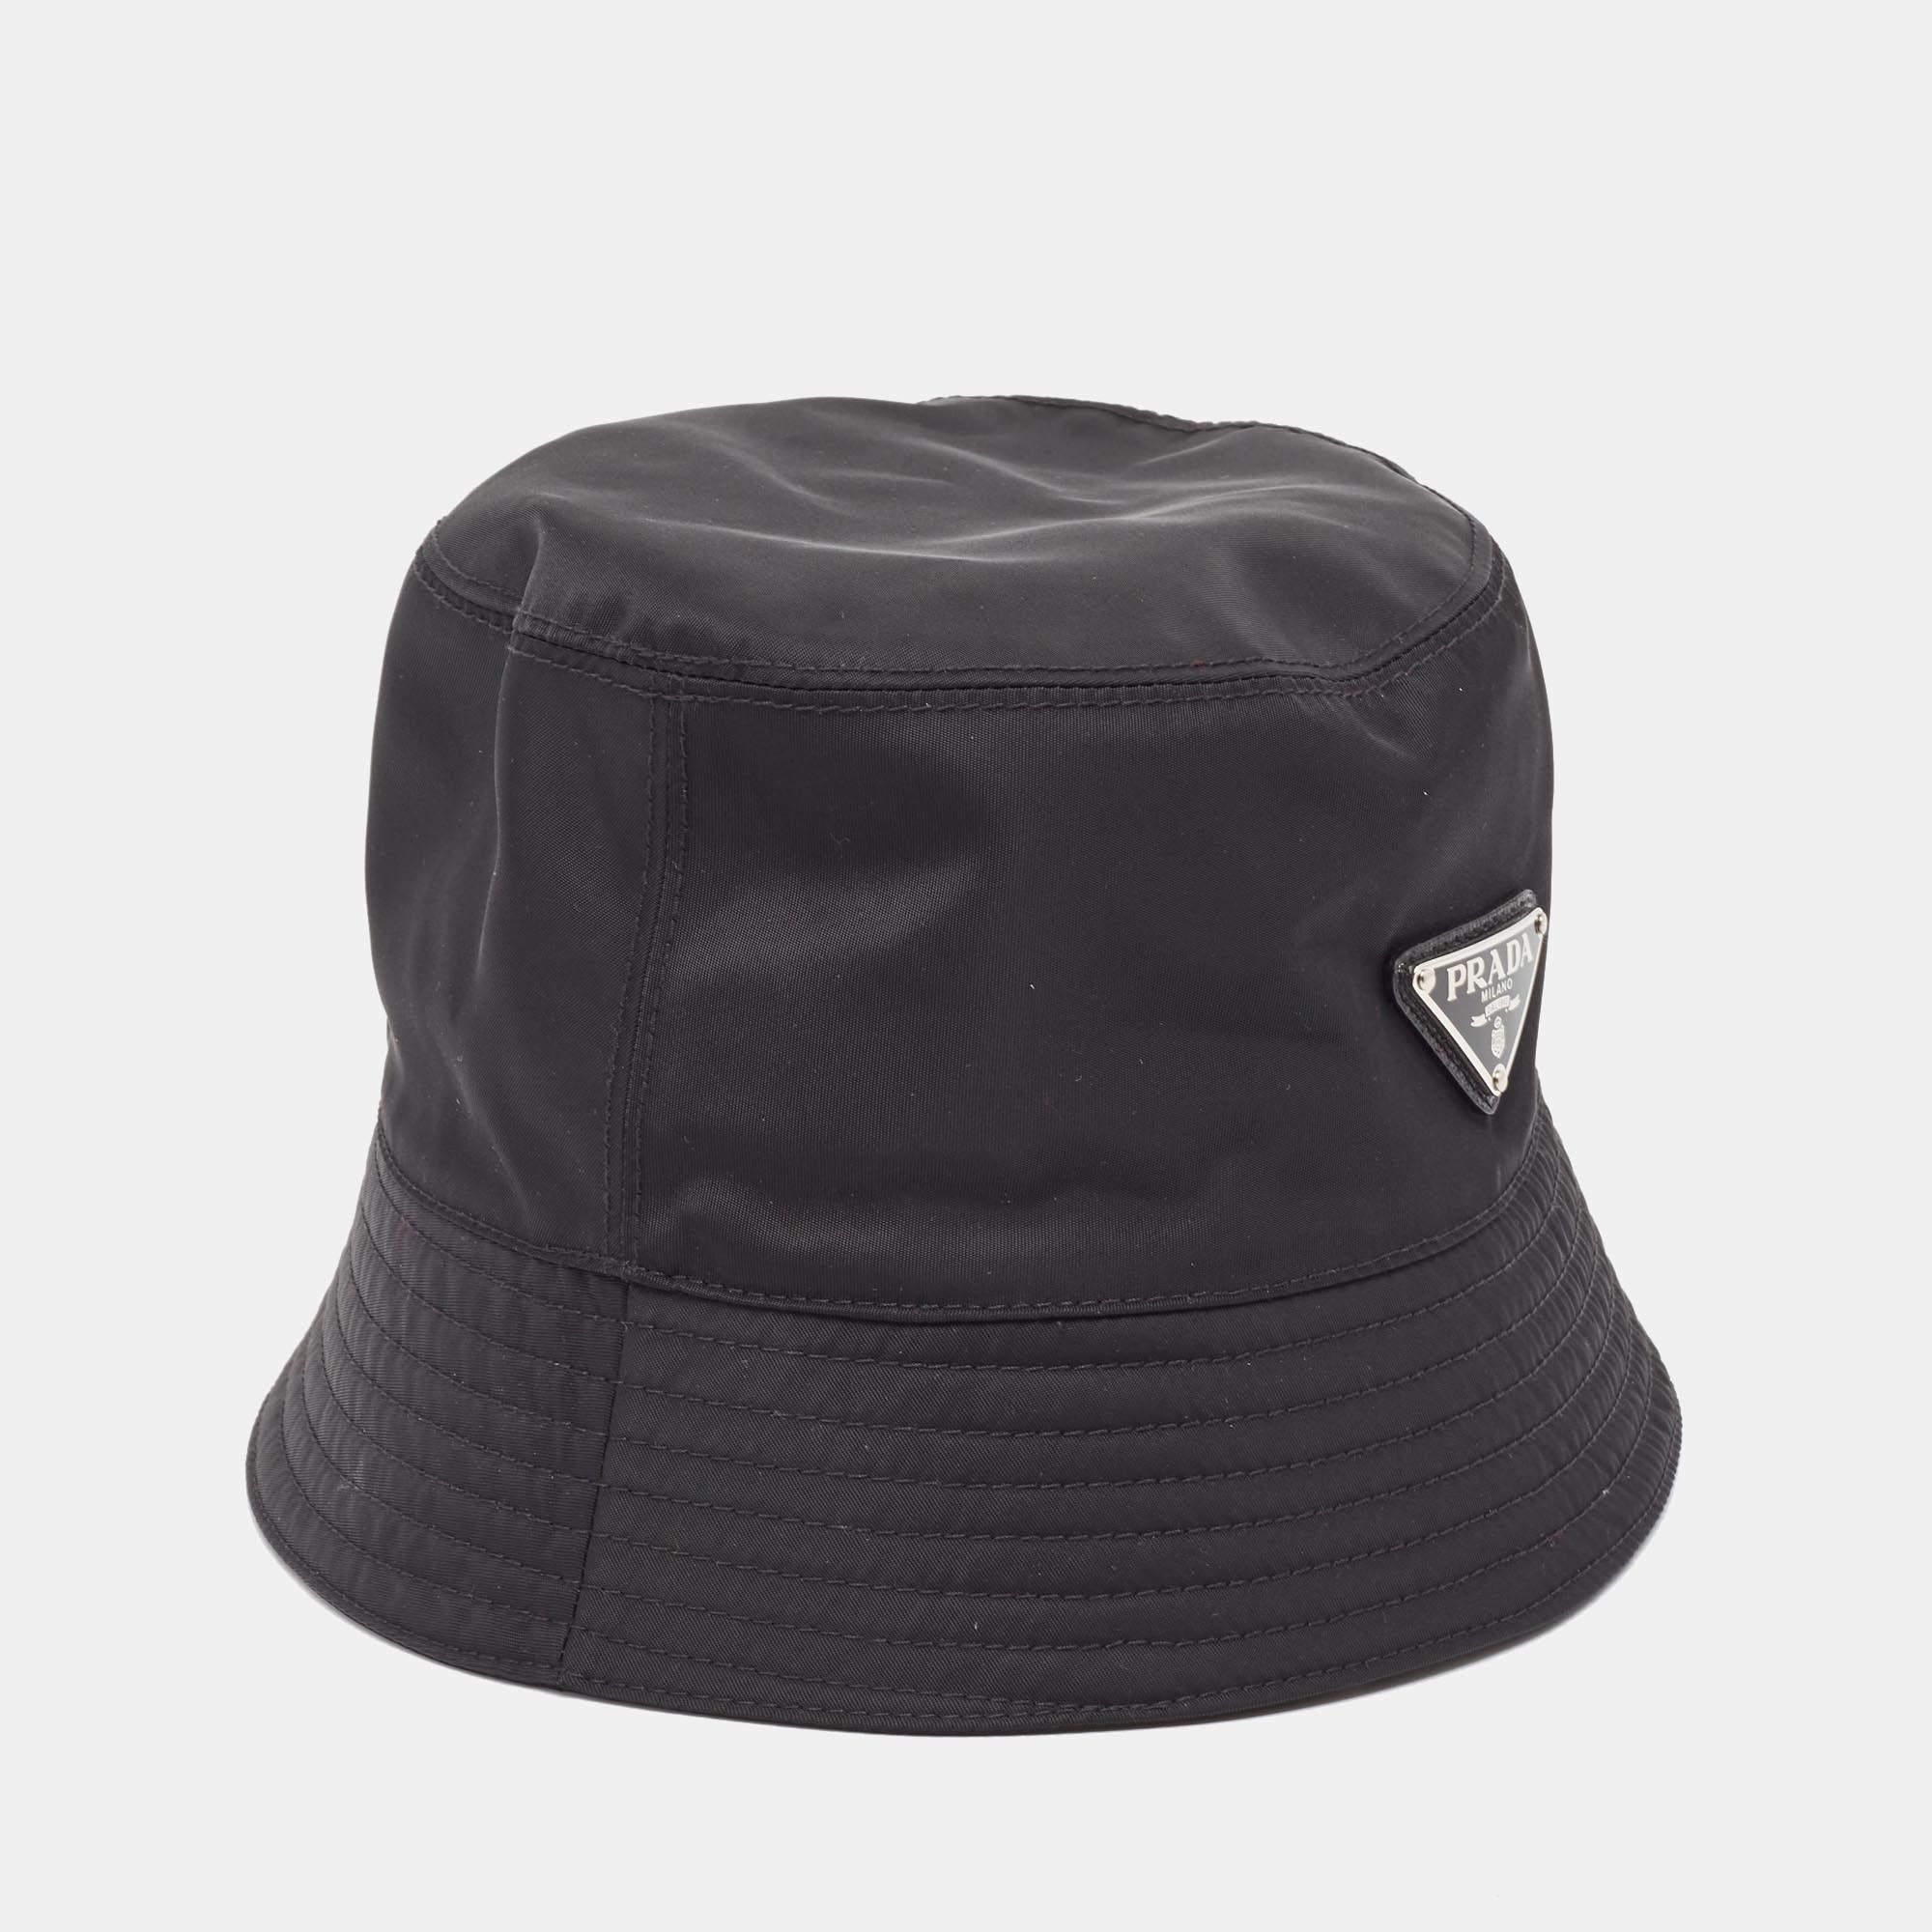 The use of recycled nylon, the black shade, and the brand accent come together to create this Prada bucket hat. A hat like this one is a style essential that will elevate your accessory game again and again.

